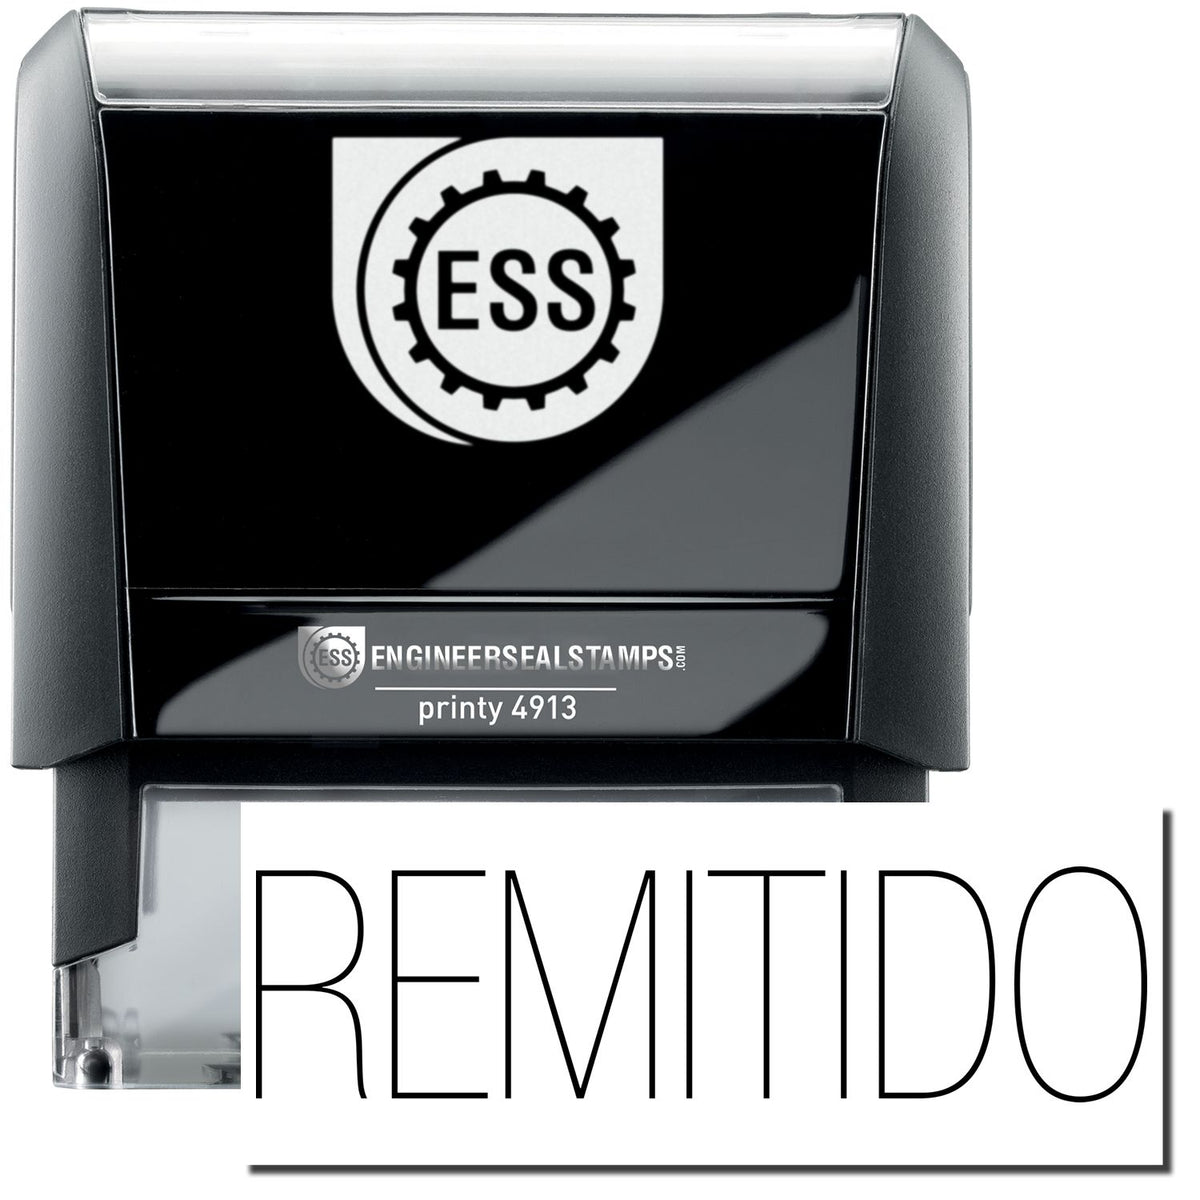 A self-inking stamp with a stamped image showing how the text &quot;REMITIDO&quot; in a large font is displayed by it after stamping.